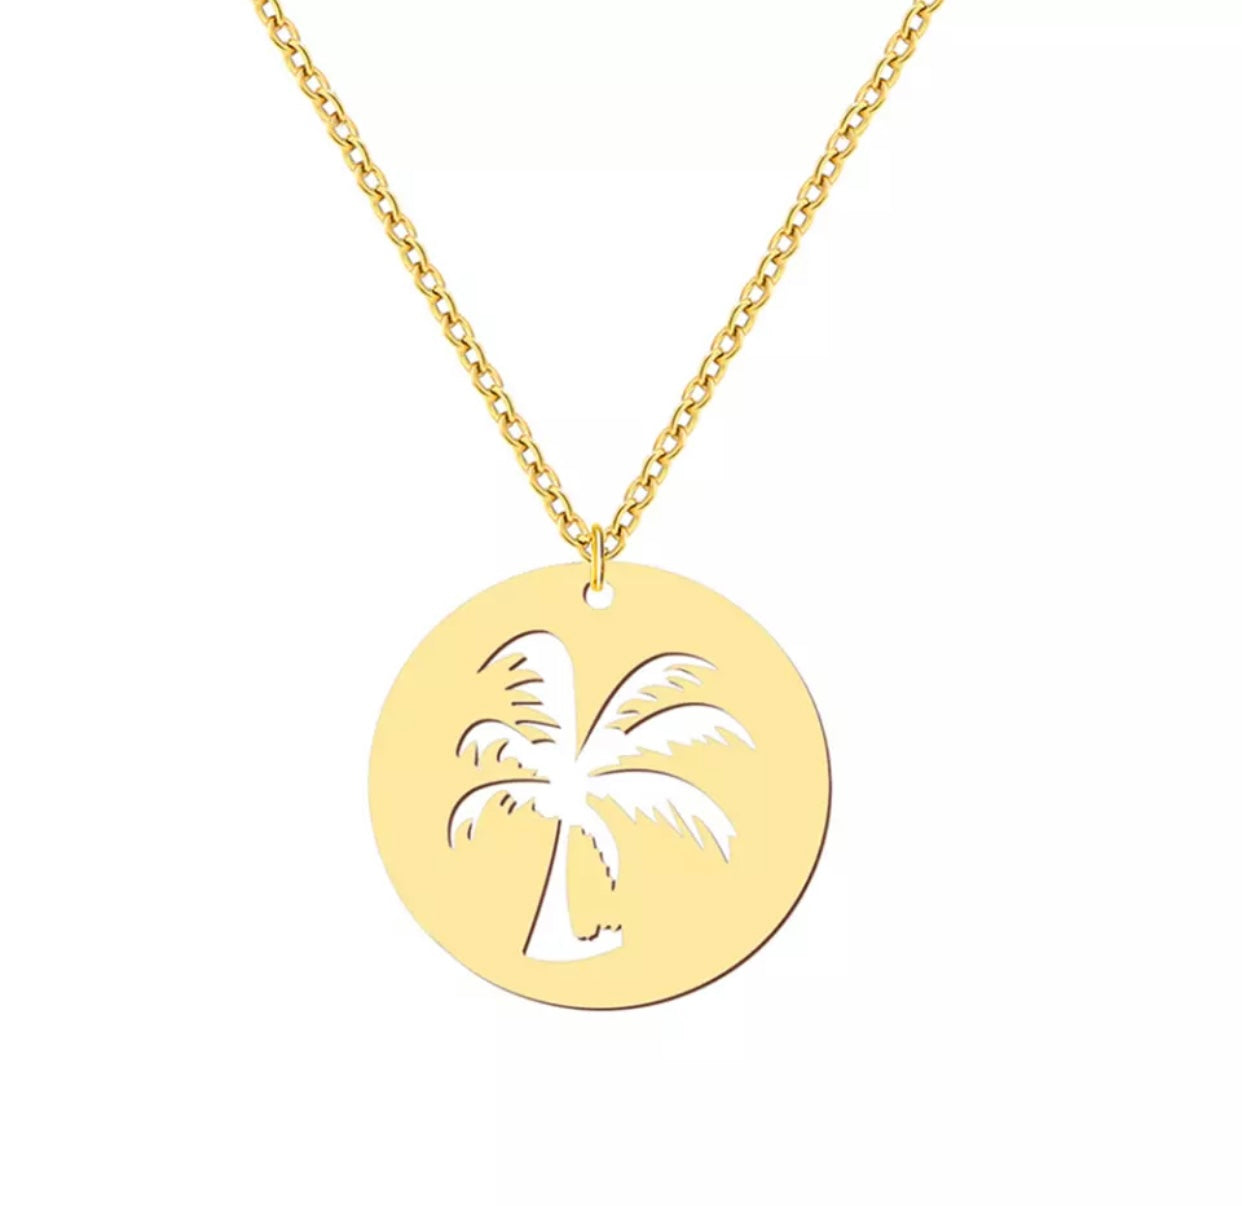 Palm Tree Stainless Steel Necklace